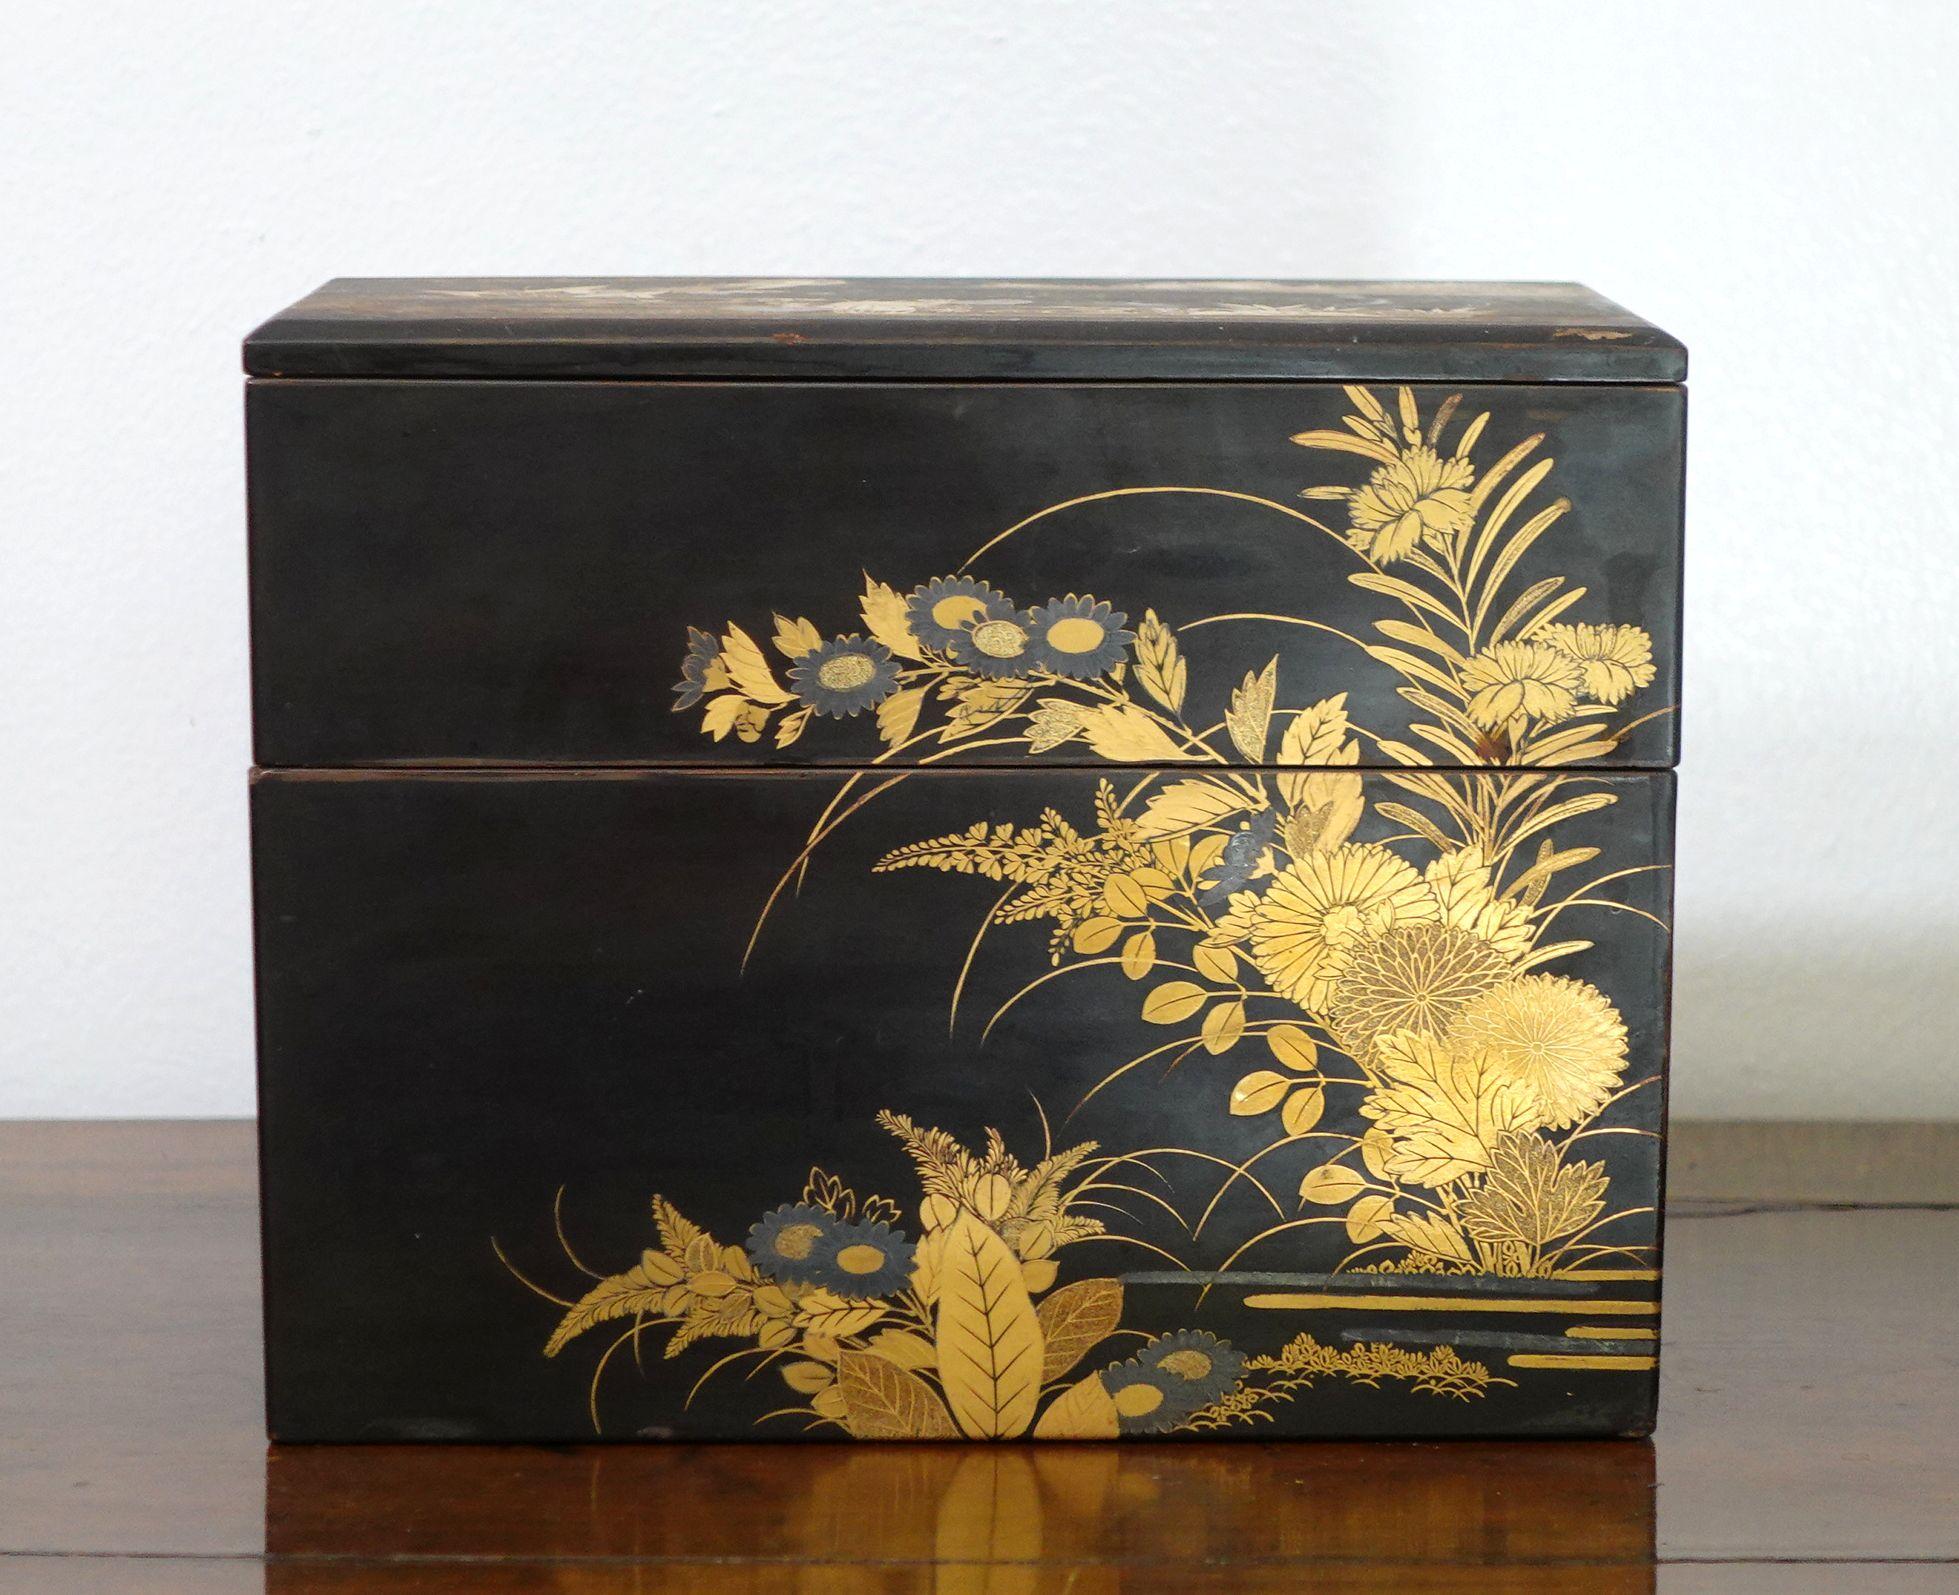 Japan, Edo to Meiji period, two-tiered, with the cover with a landscape design, the four sides with guilt chrysanthemum flowers.